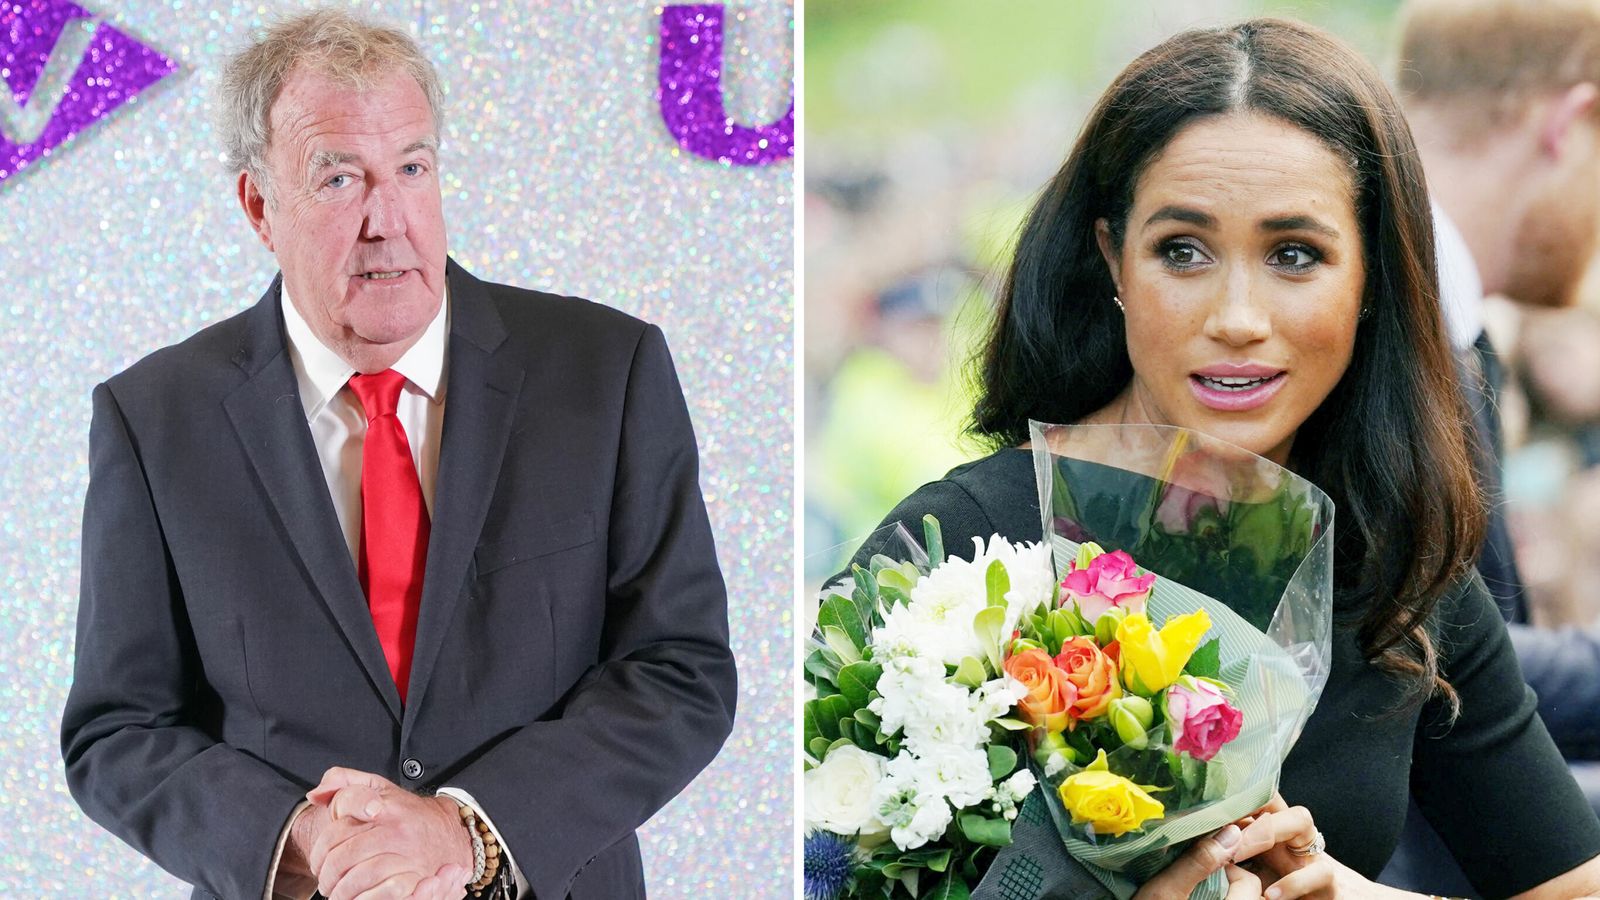 Jeremy Clarkson's article about Meghan: Press watchdog IPSO launches investigation